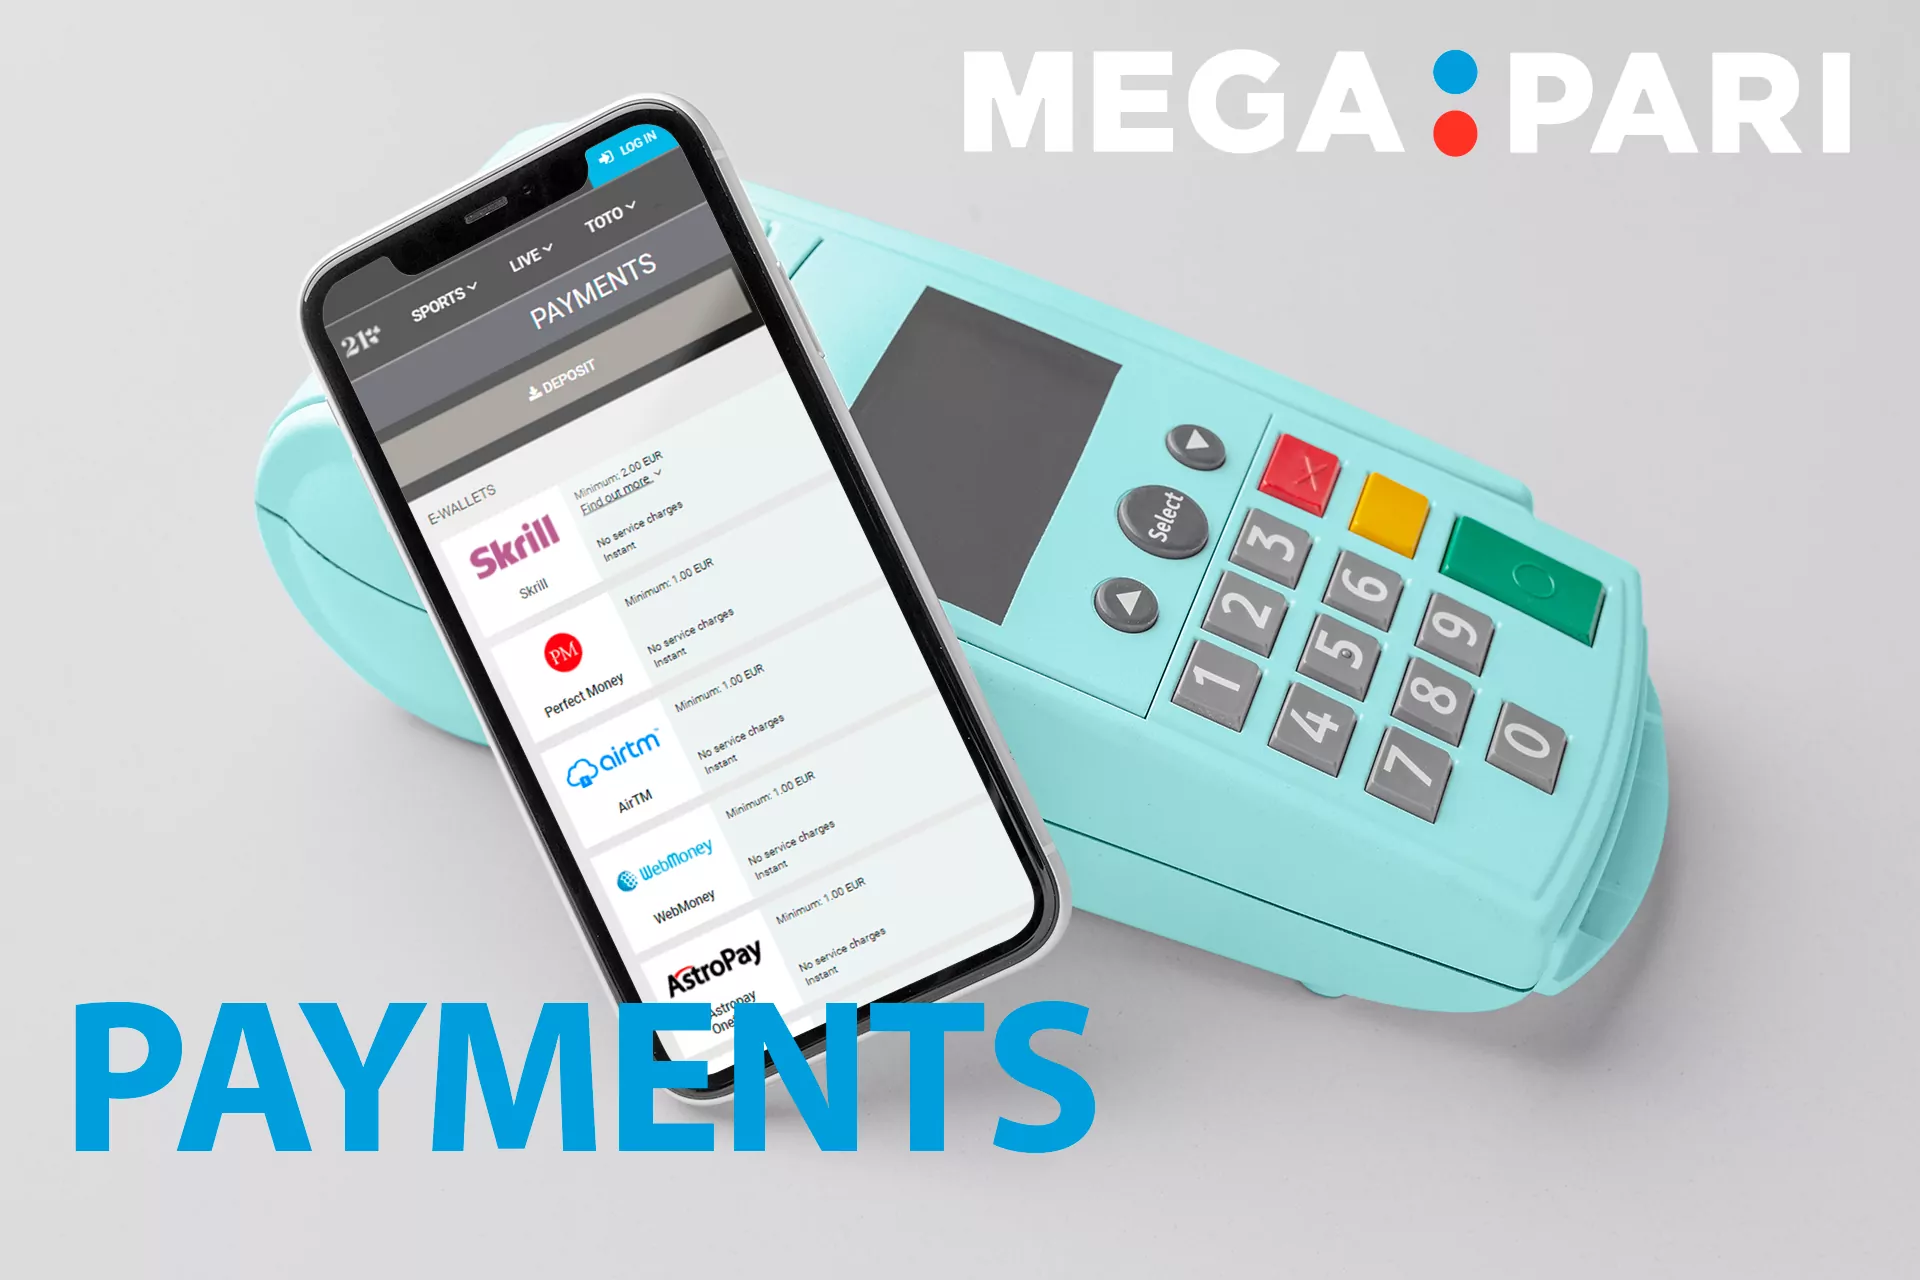 You can deposit and withdraw money right in the Megapari mobile app.